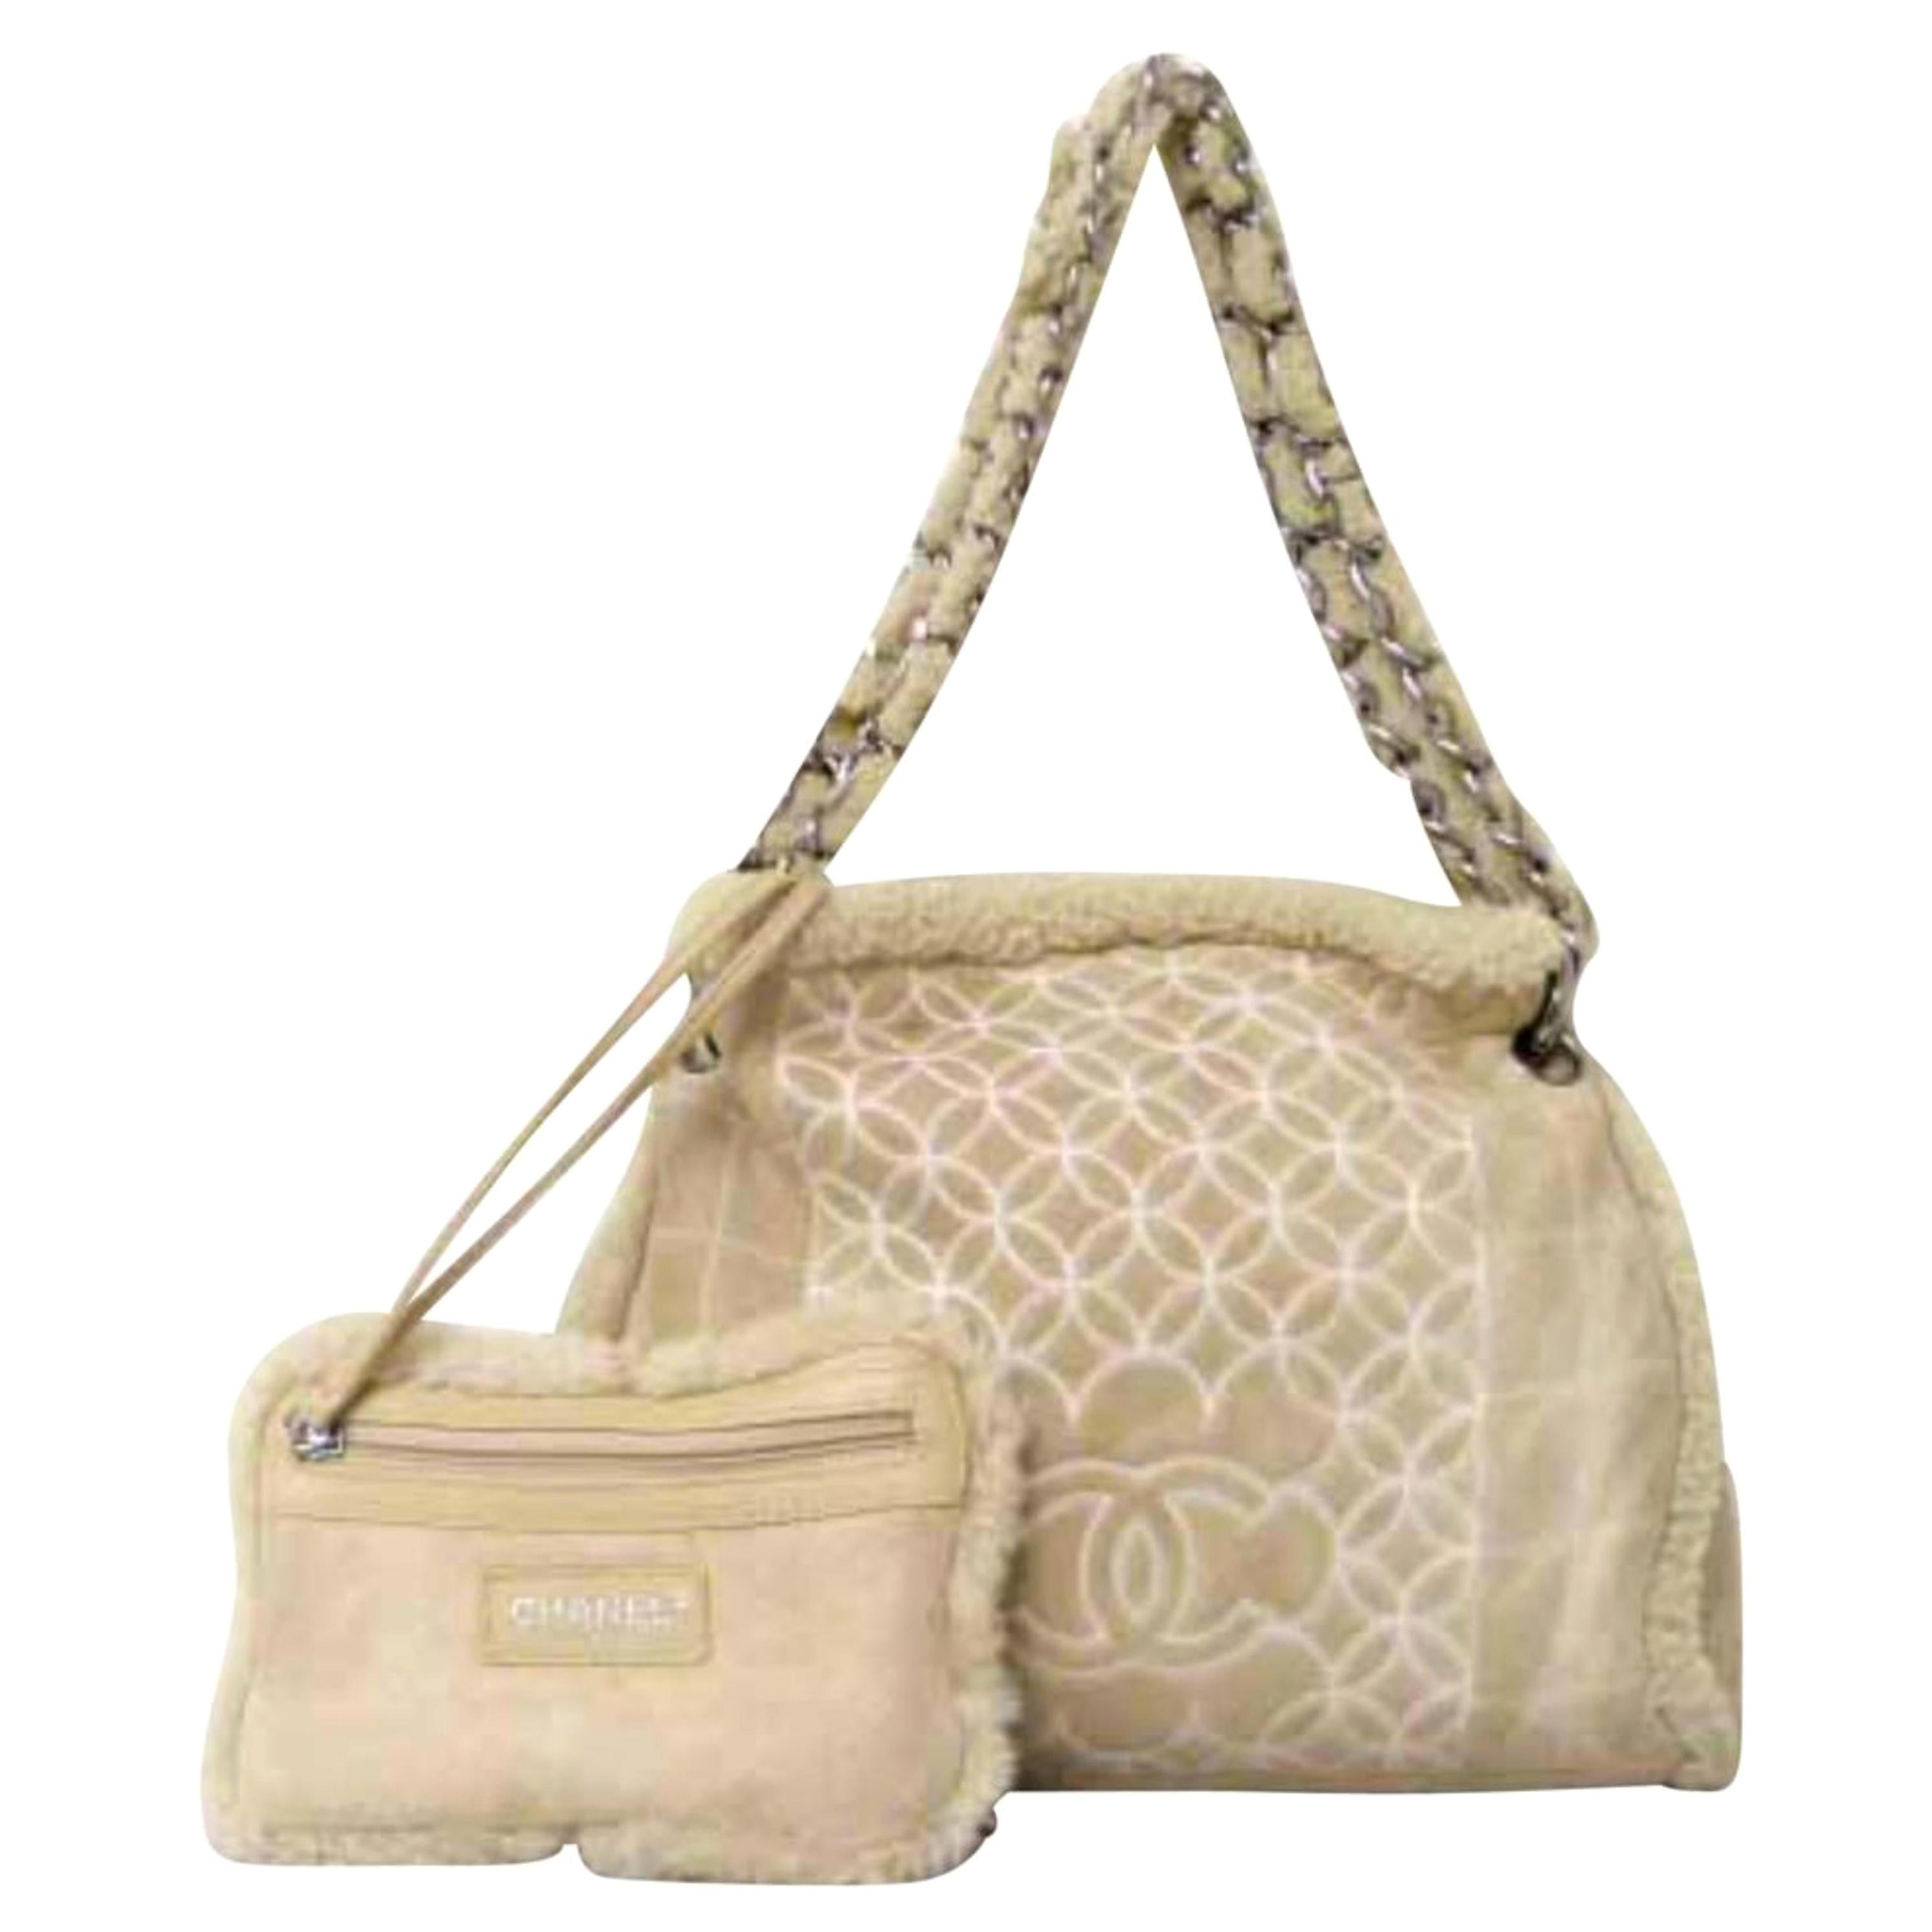 Chanel Chain Tote W/ Pouch 226196 Beige Shearling Wool Shoulder Bag For Sale